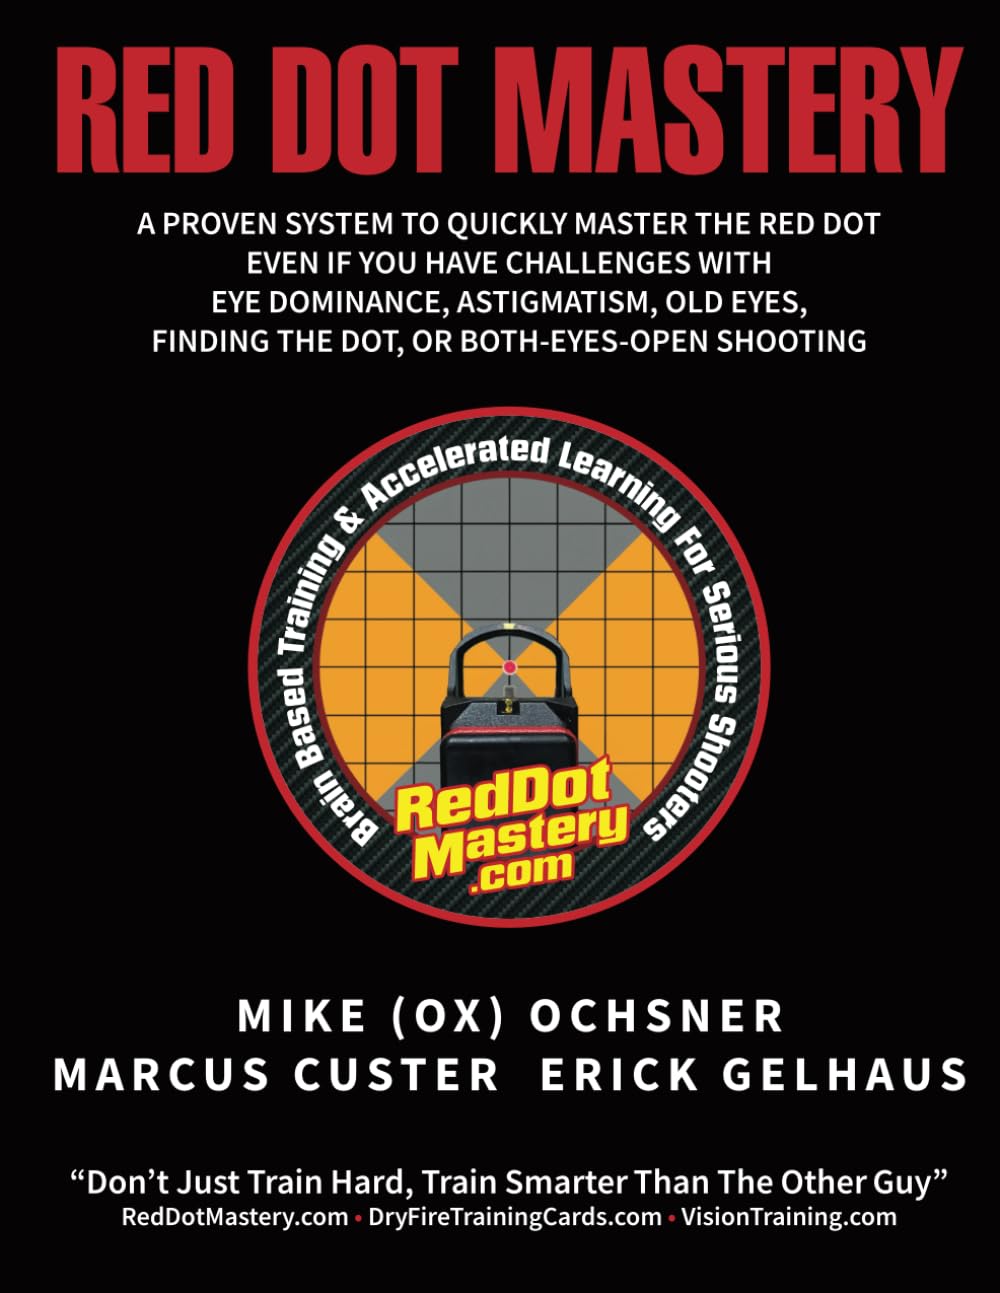 Red Dot Mastery: A proven system to quickly master the pistol mounted red dot optic, even if you have challenges with eye dominance, astigmatism, old eyes, finding the dot, or both-eyes-open shooting